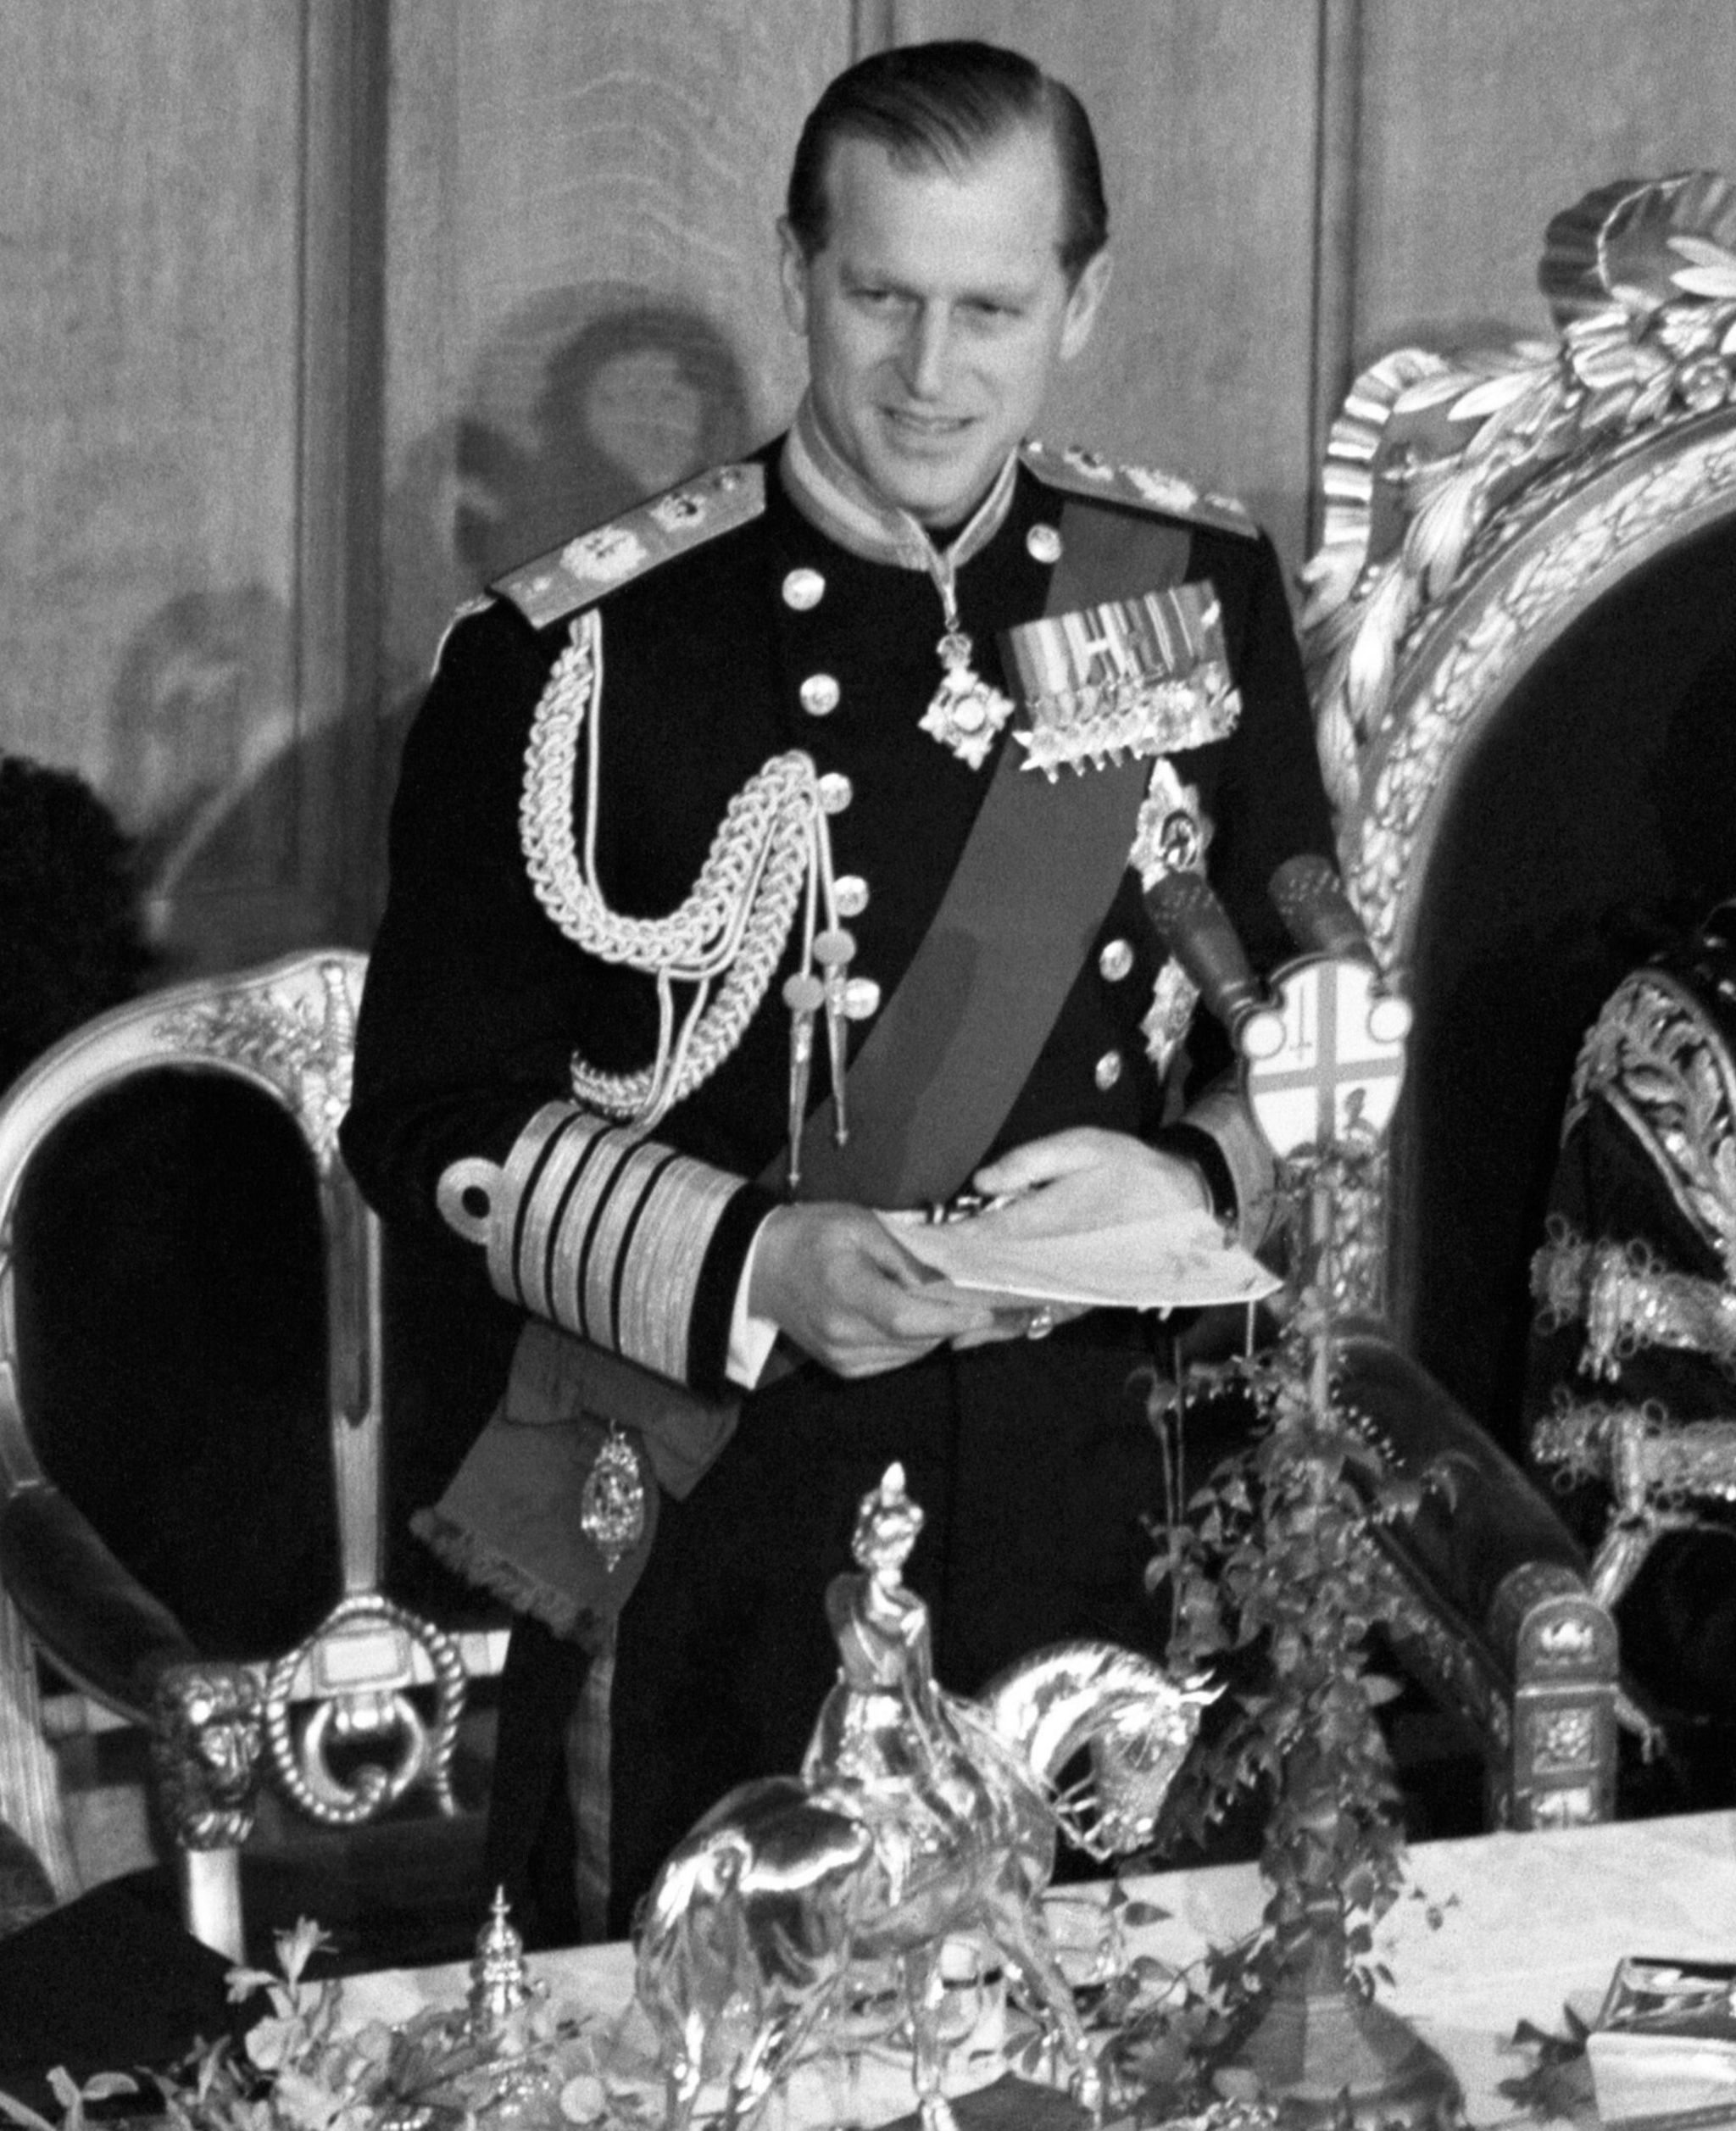 Prince Philip gives a speech at a luncheon